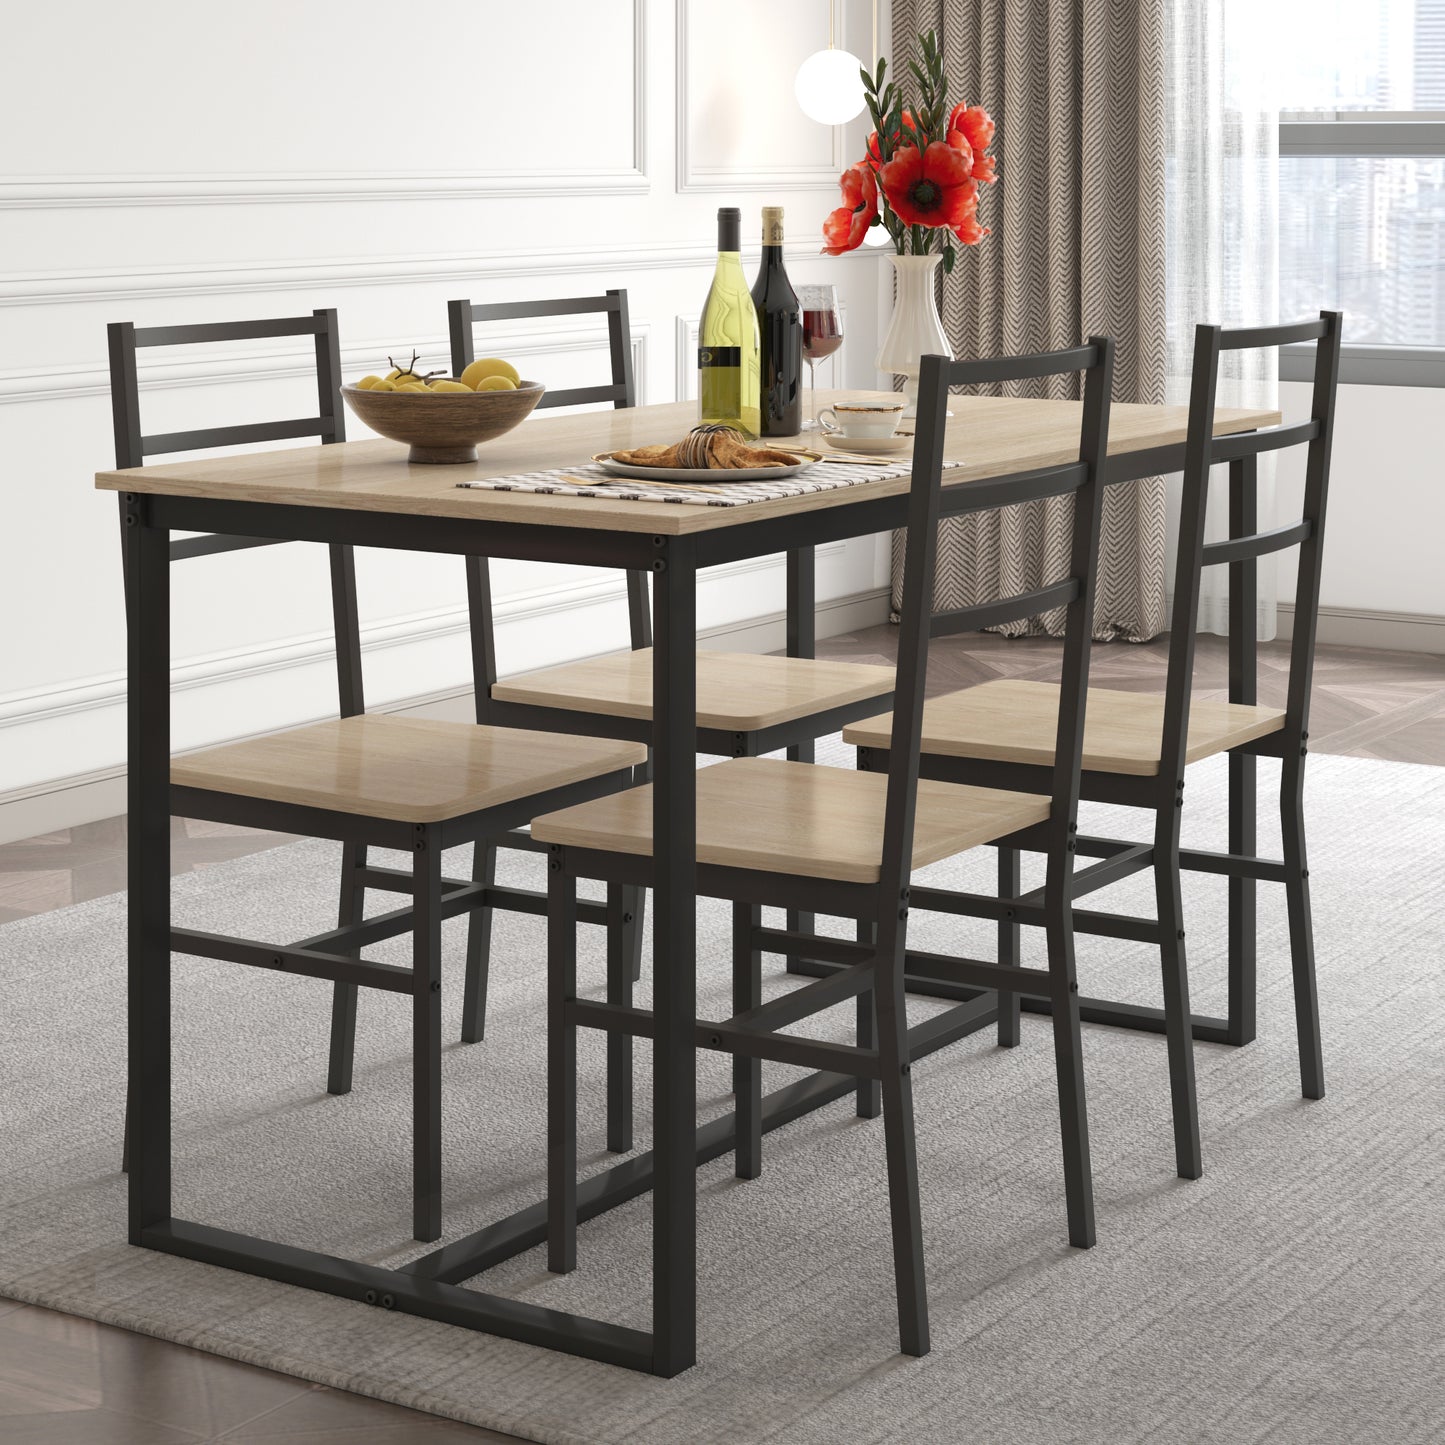 SYNGAR 5 Piece Dining Table Set, Modern Rustic Table and Chairs Set for 4, Home Kitchen Breakfast Table Set, Dinette Table Set with 4 Chairs, Wooden Tabletop and Steel Frame, D6114